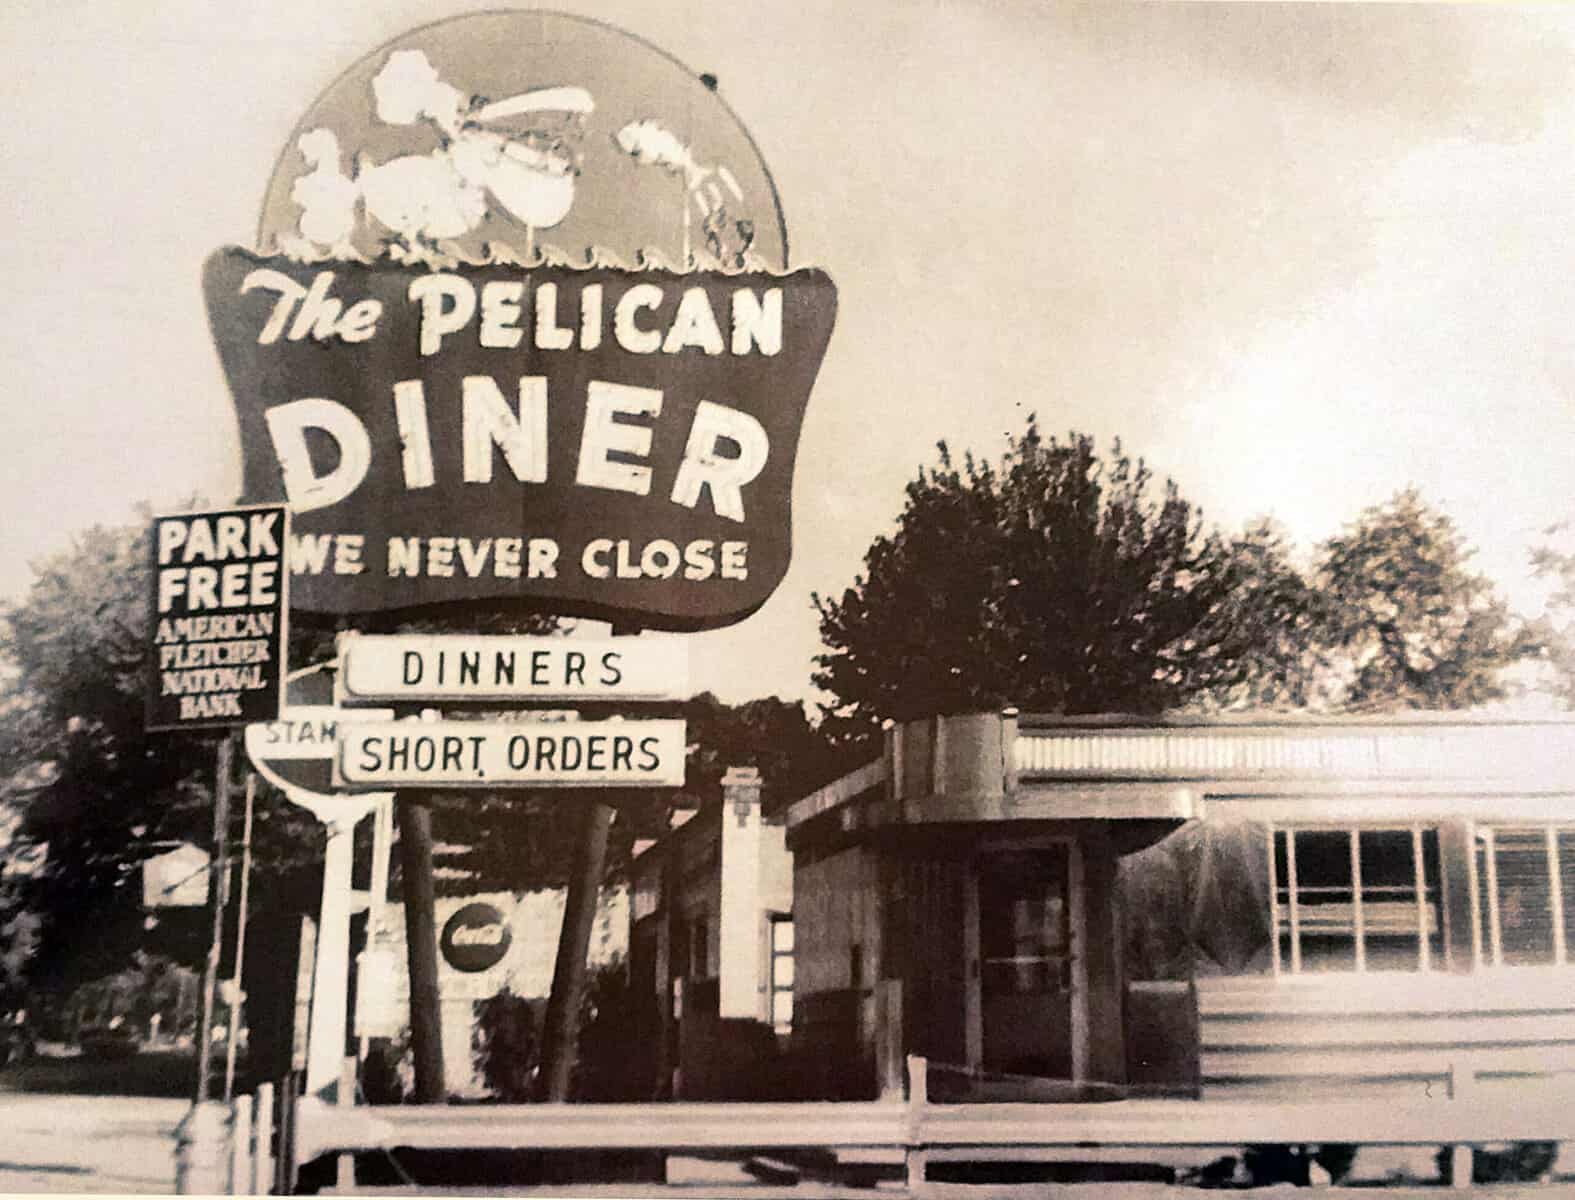 vintage photo of the Pelican Diner